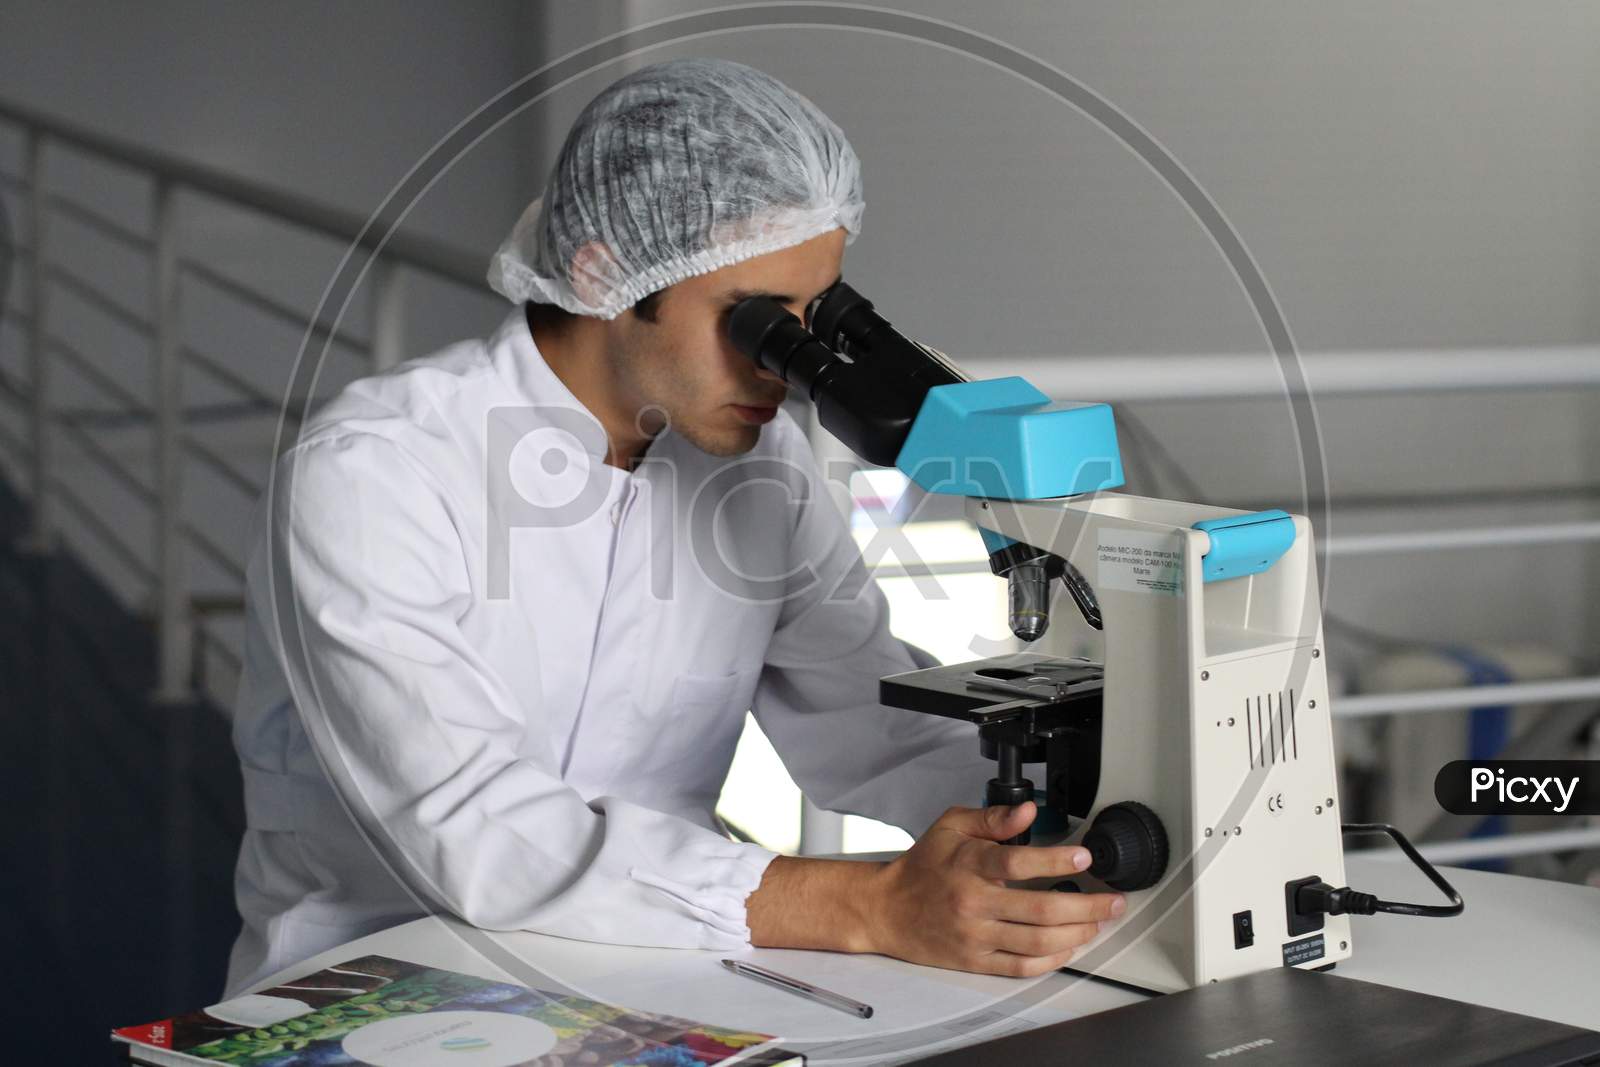 A SCIENTIST IS RESEARCHING WITH MICROSCOPE TO FIND A MEDICINE.